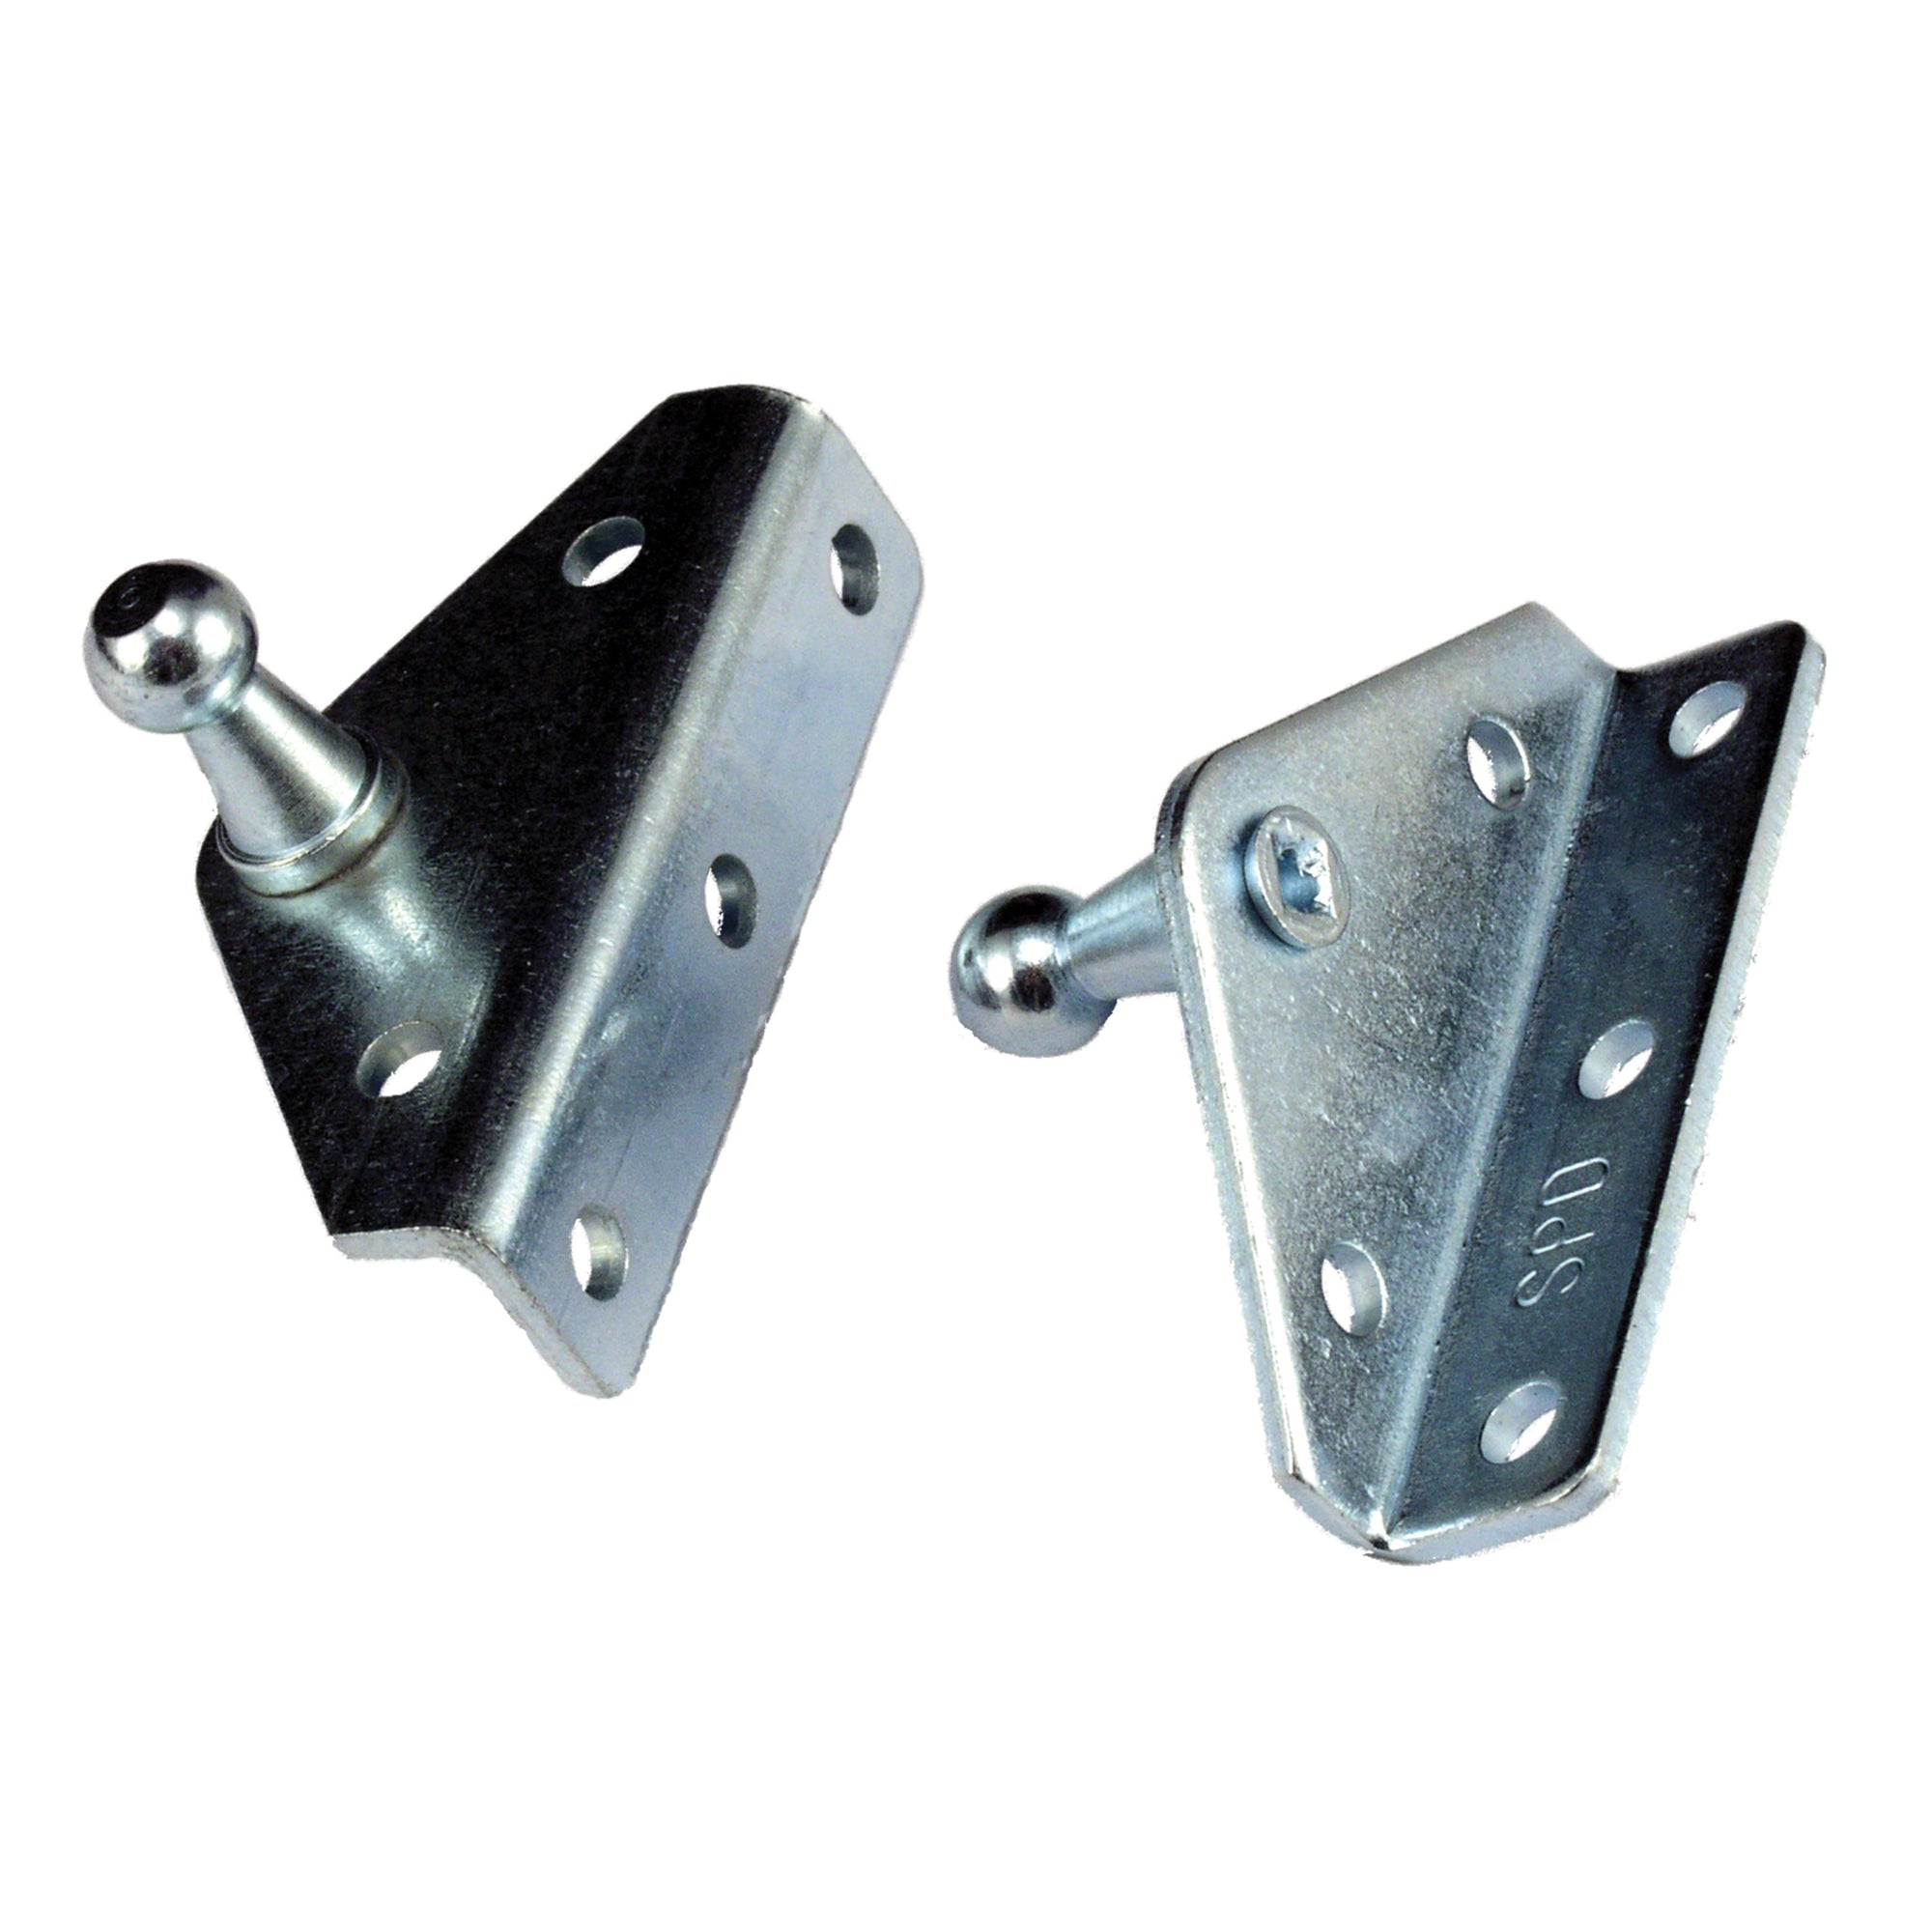 JR Products BR-12552 Gas Spring Mounting Bracket - Angled, Pack of 2